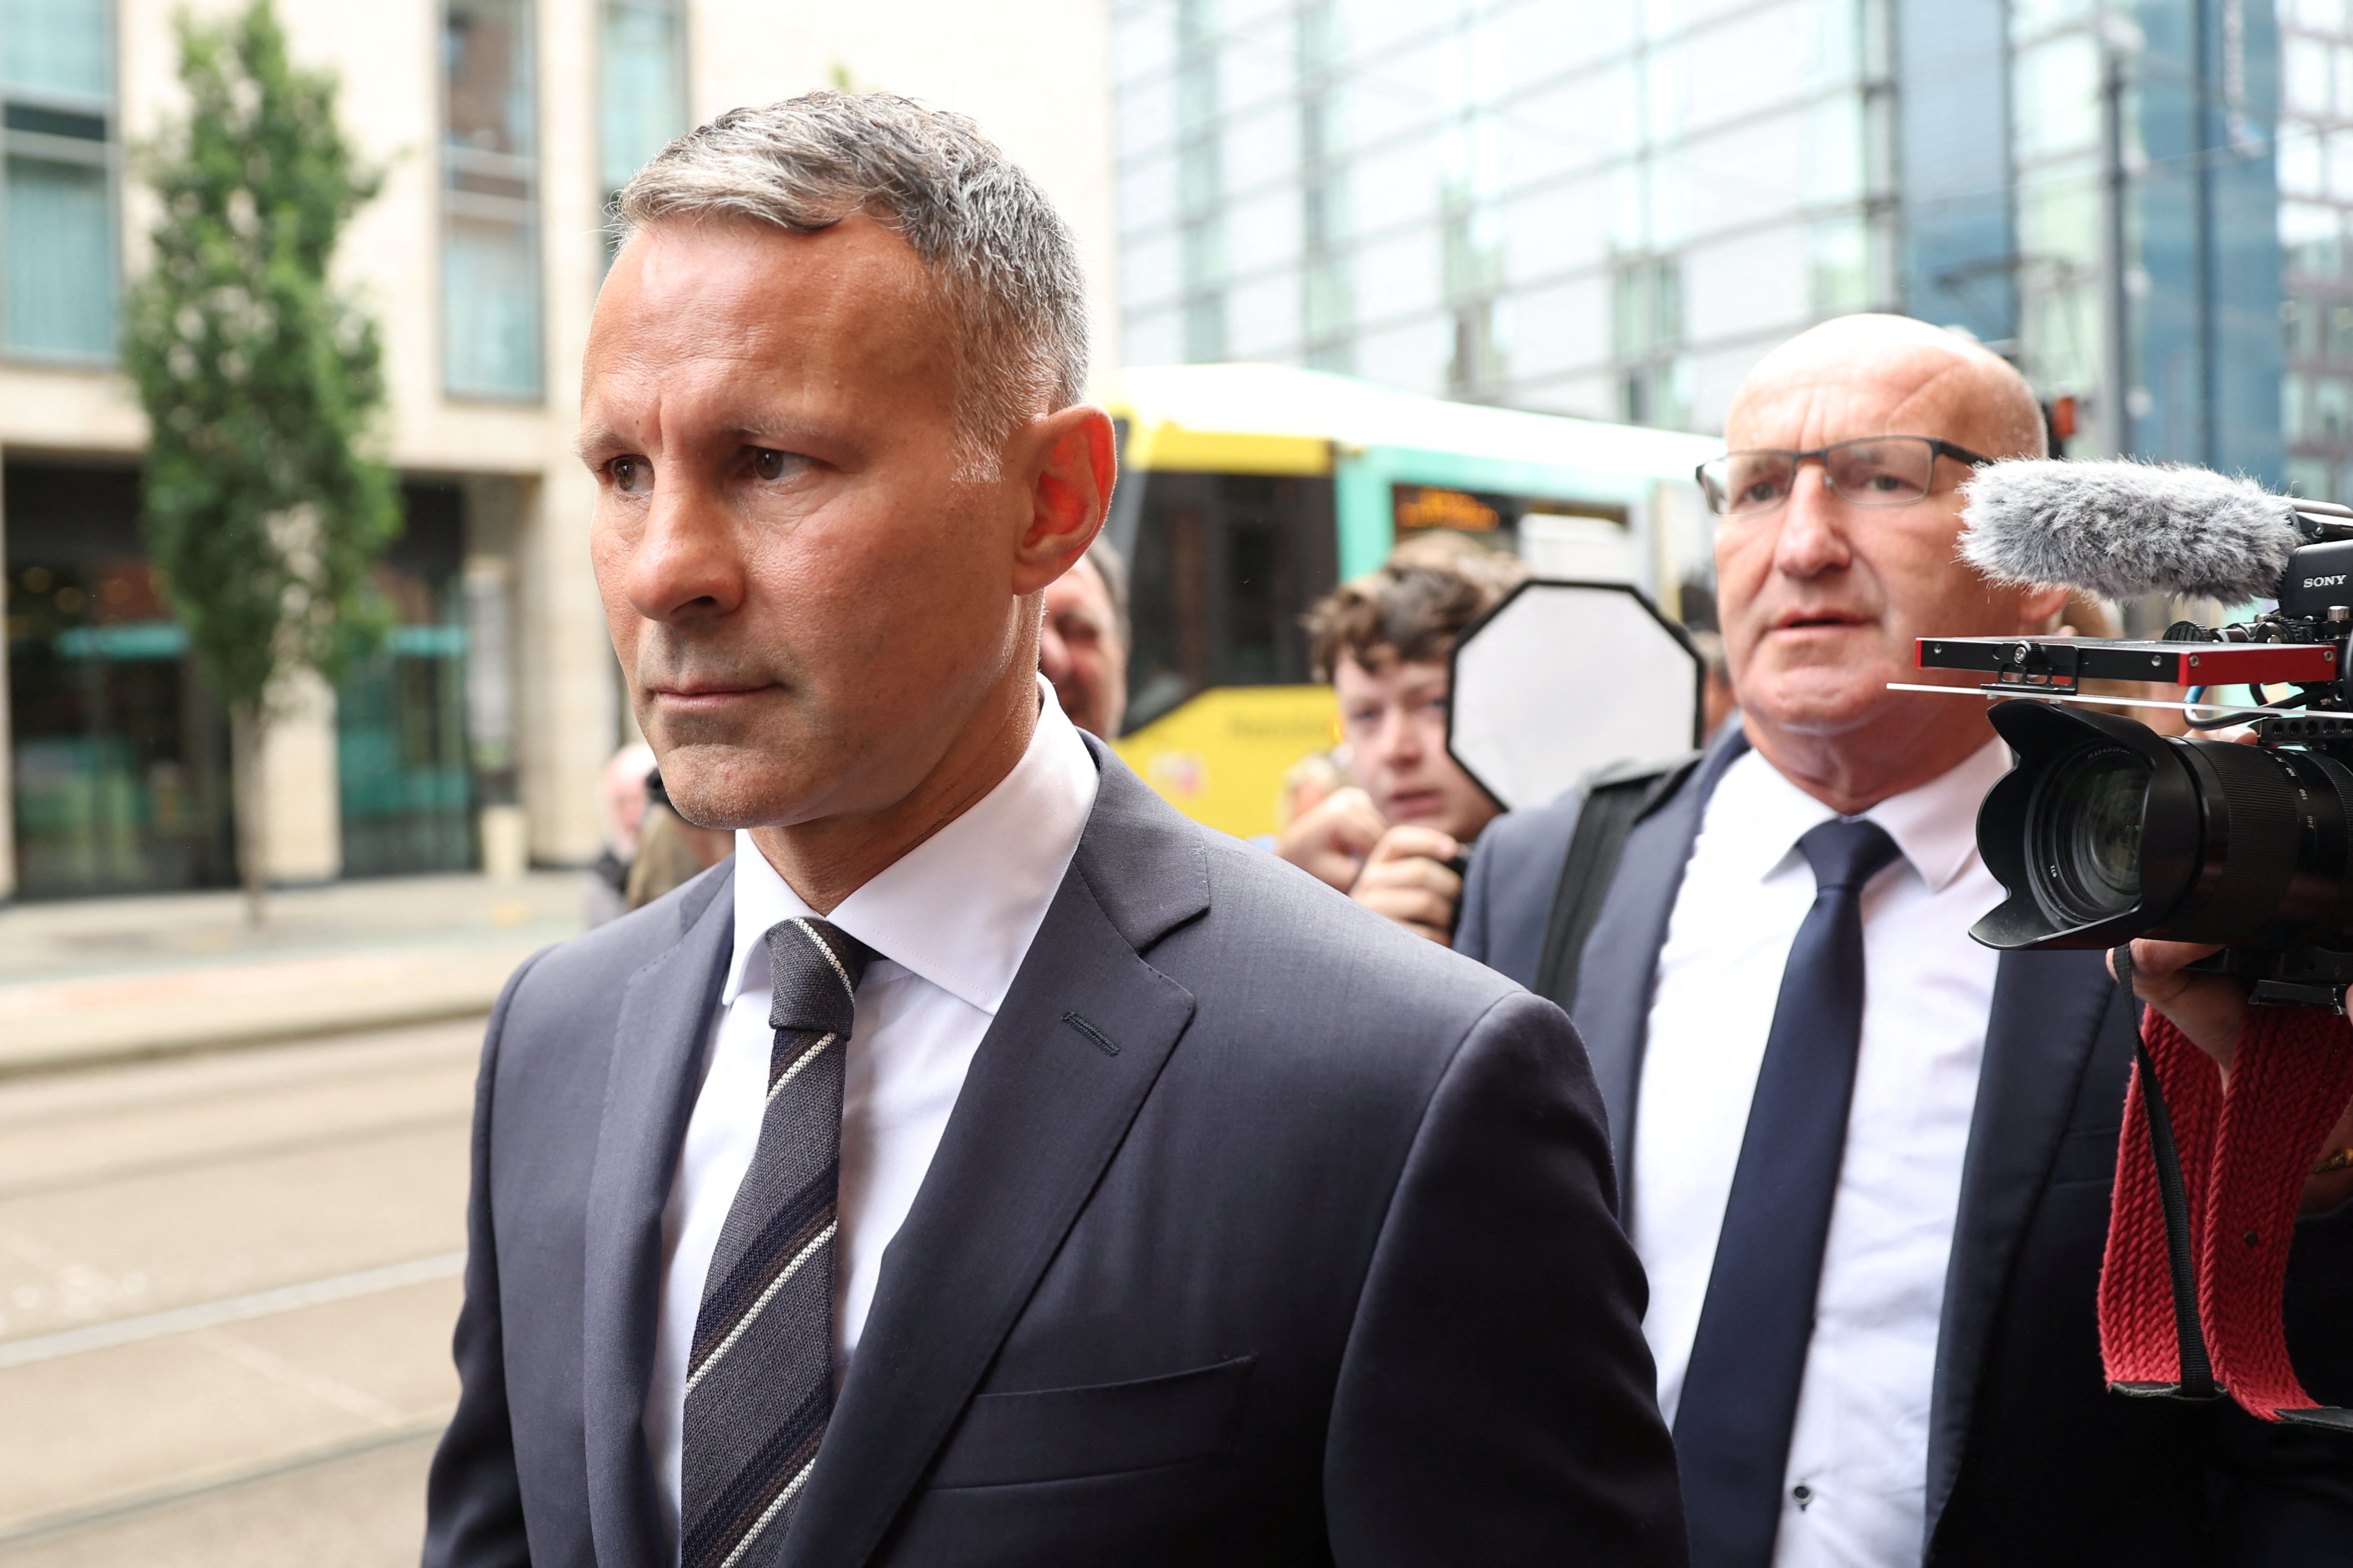 Former Manchester United footballer Giggs arrives at court in Manchester